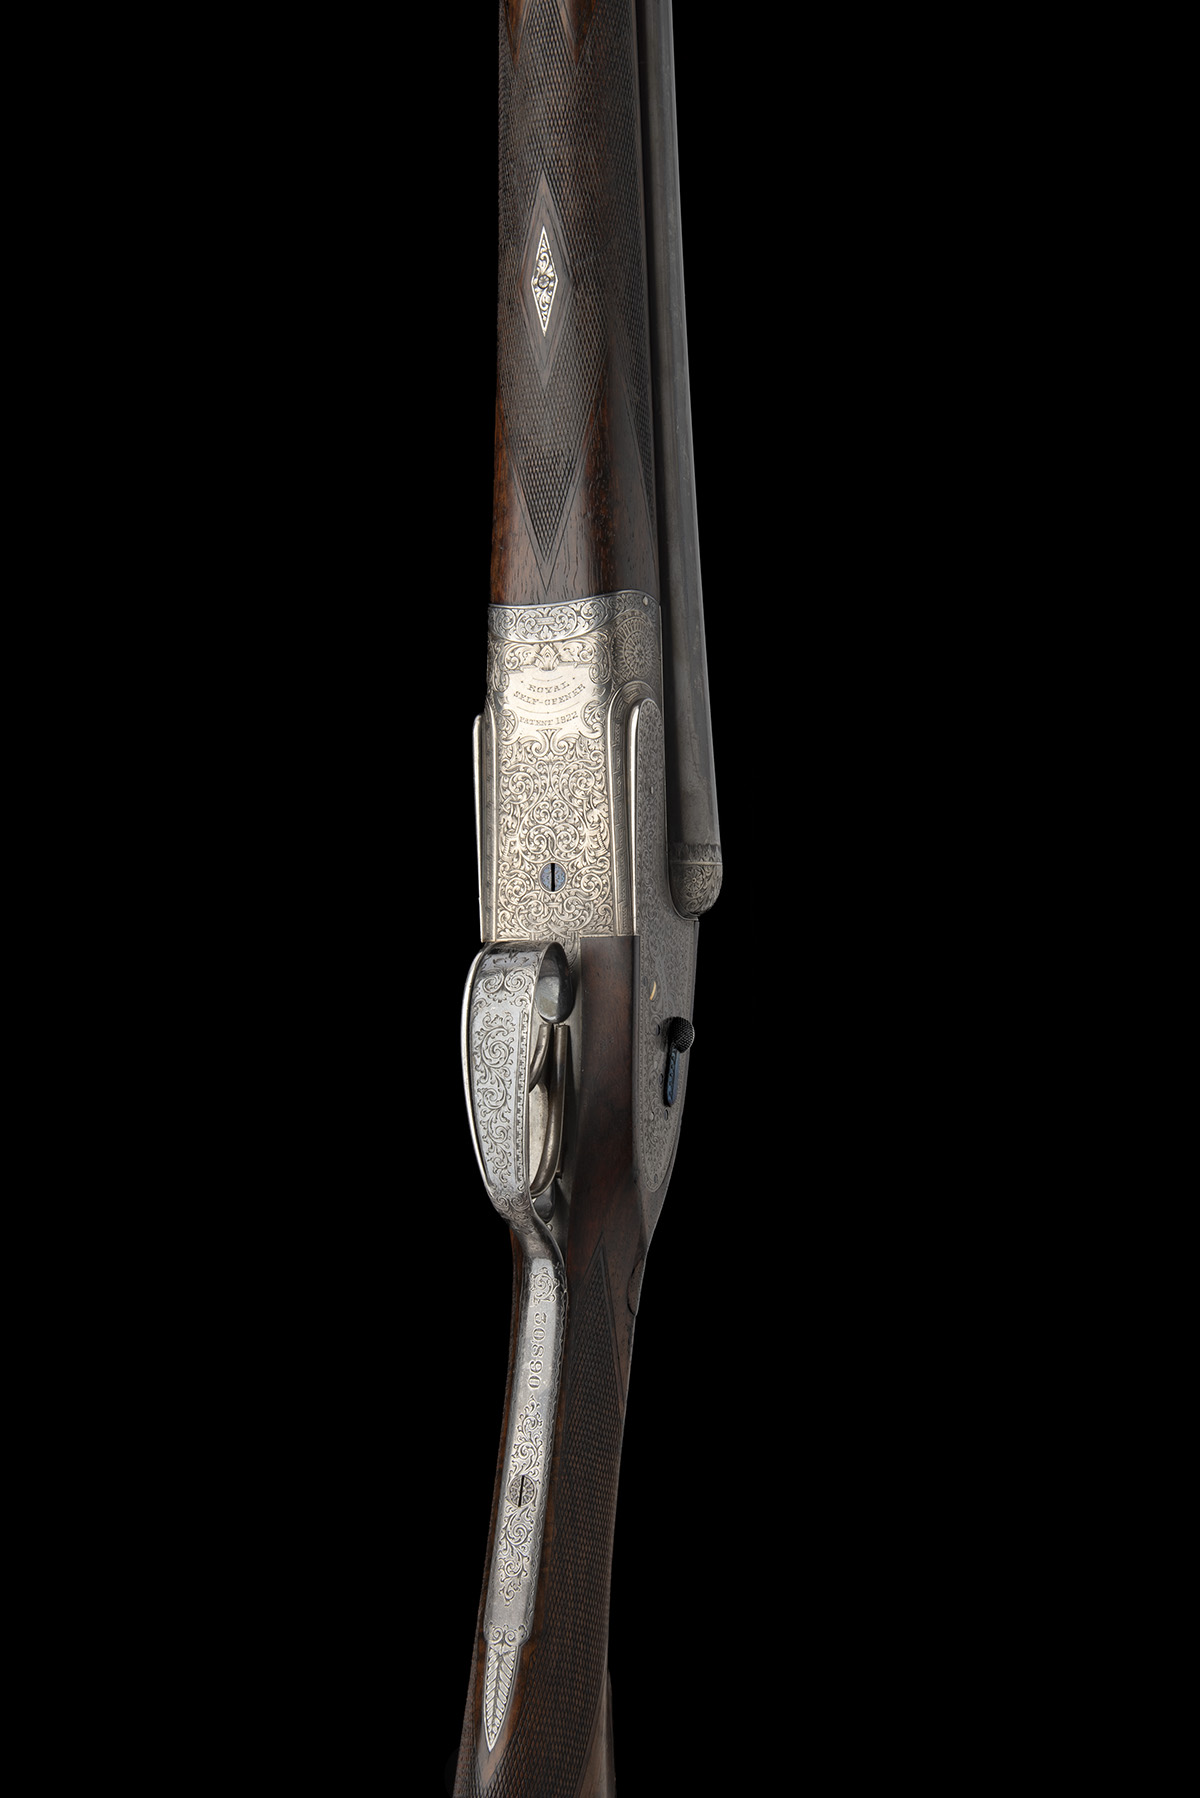 HOLLAND & HOLLAND A 12-BORE 'ROYAL' SELF-OPENING HAND-DETACHABLE SIDELOCK EJECTOR, serial no. 30890, - Image 3 of 7